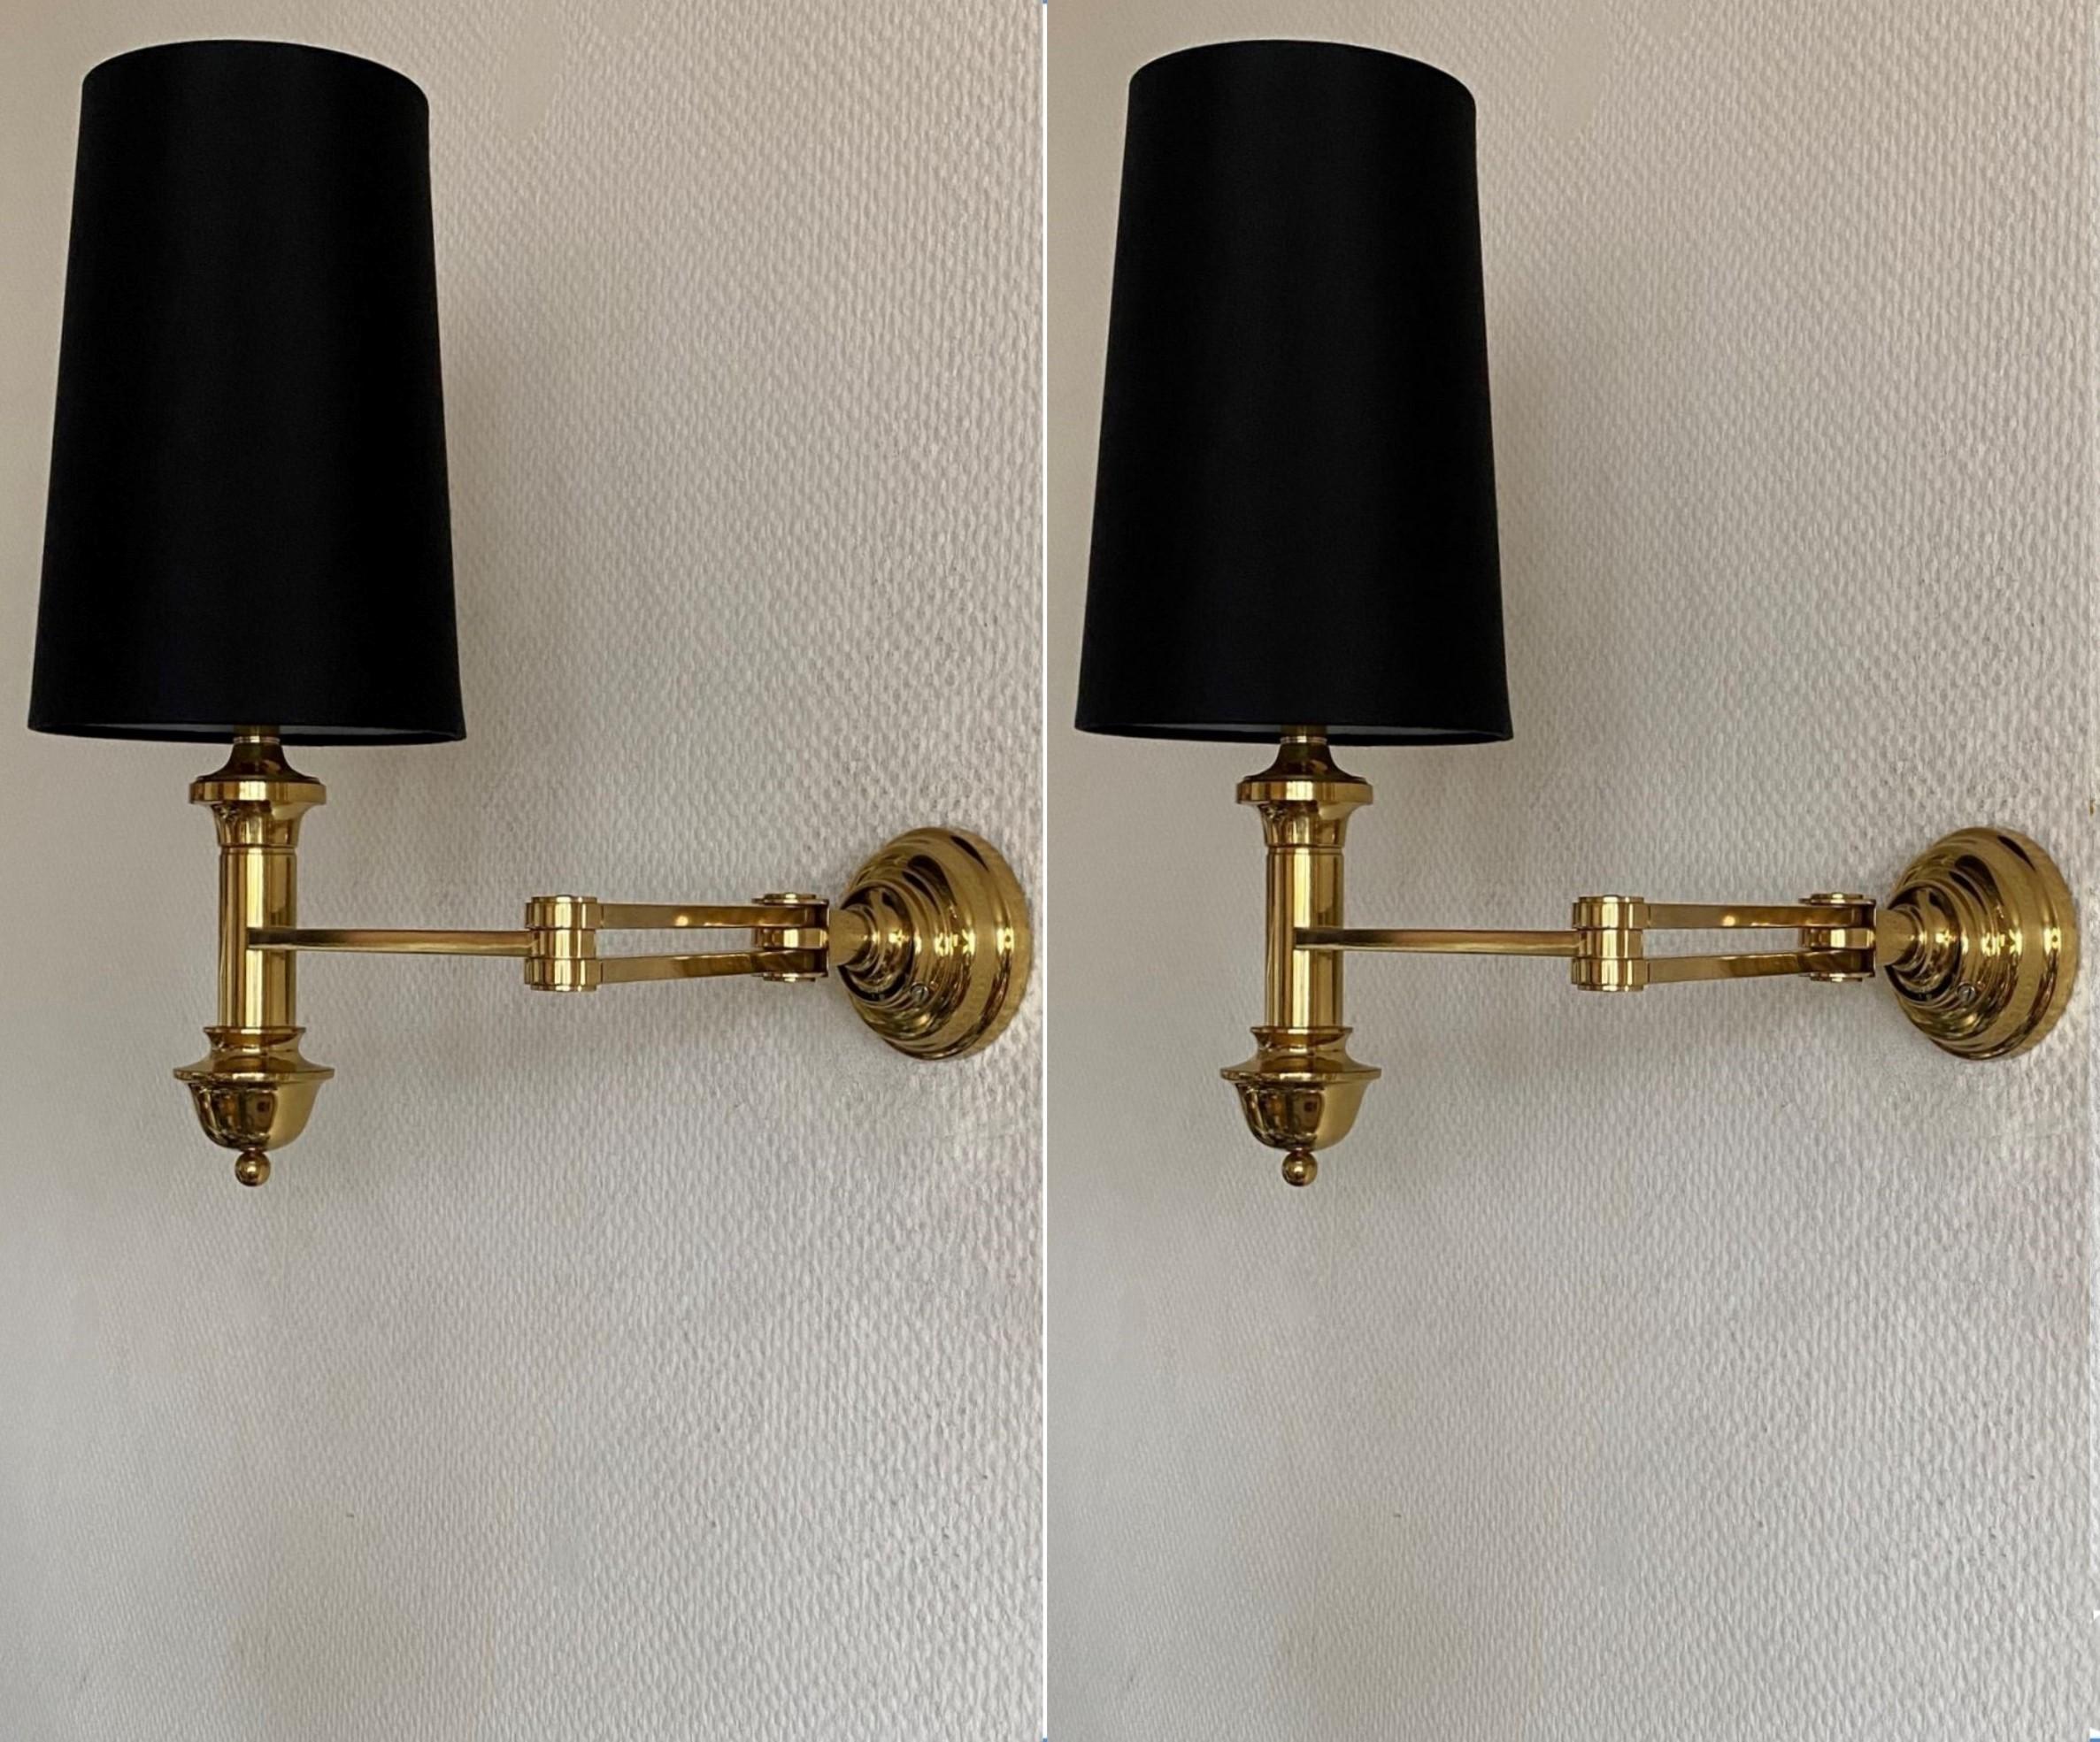 A pair of high-quality solid swing arm wall lamps in Maison Jansen style, France, 1960s. Precise craftsmanship made of hand-forged polished brass with black linen shades. These wall sconces are design rarities from the 1960s that are no longer